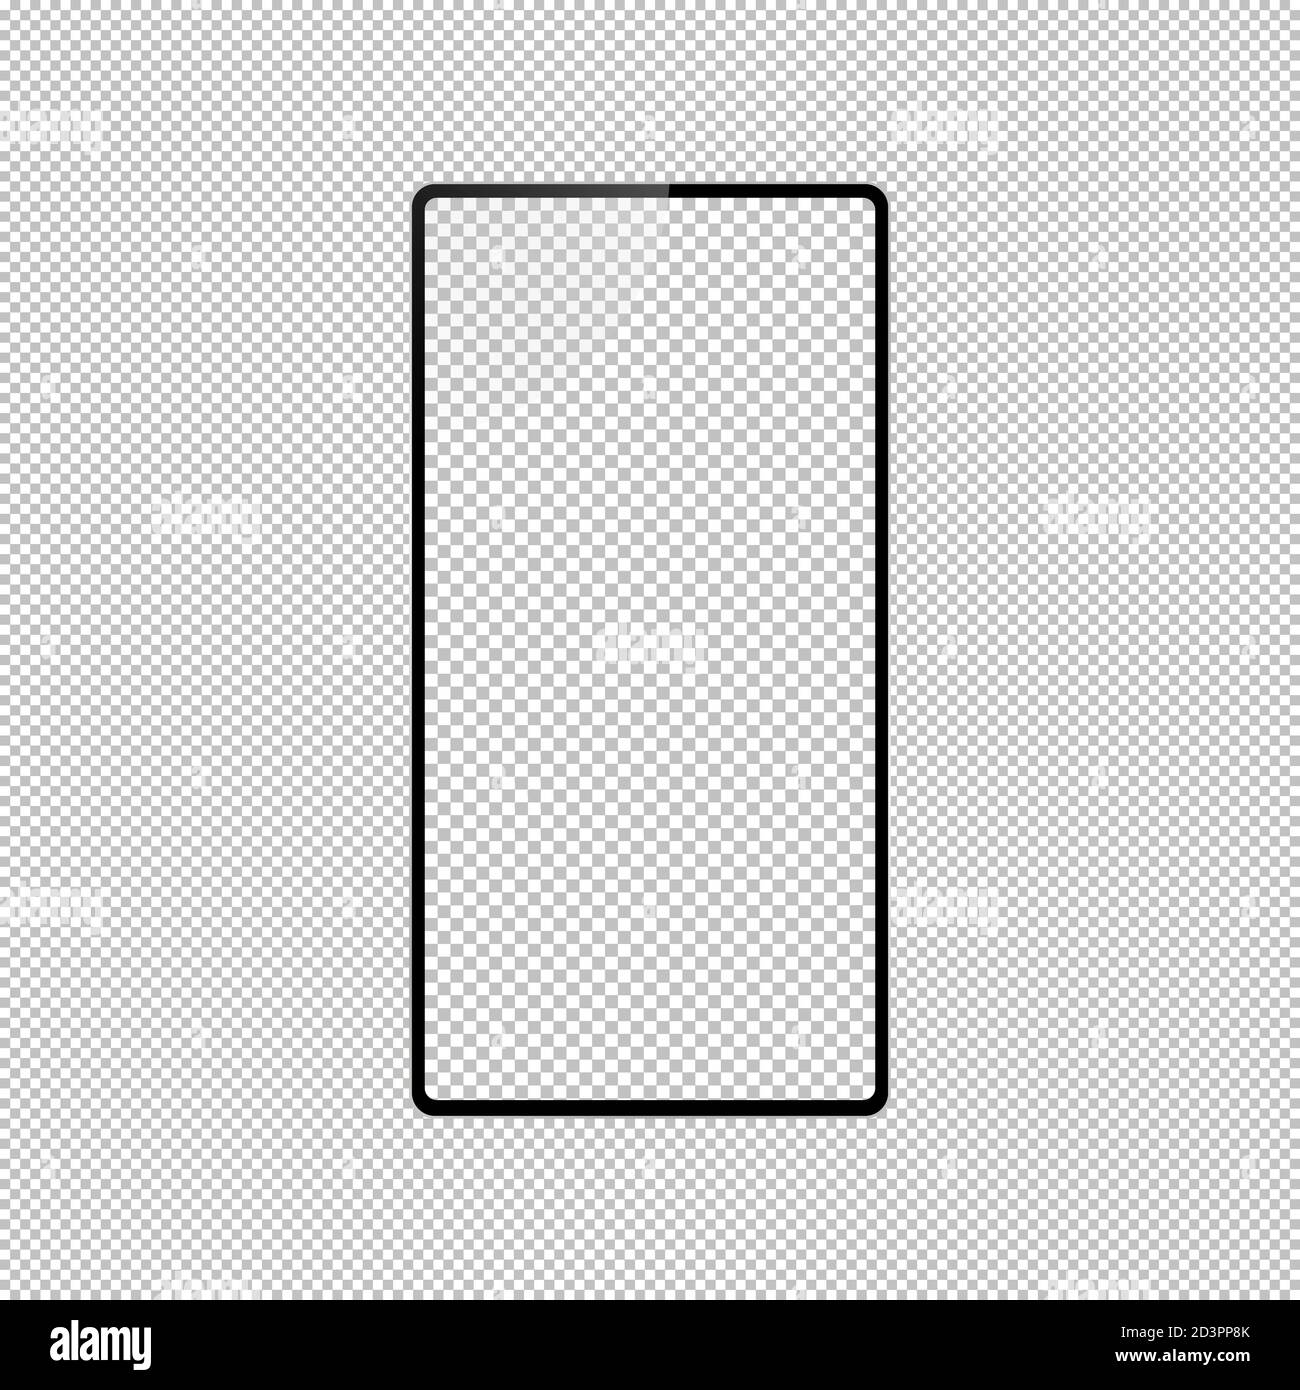 High quality realistic smart phone mock up with empty screen. Black detailed mobile phone with camera, volume and power buttons. Vector illustration. Stock Photo